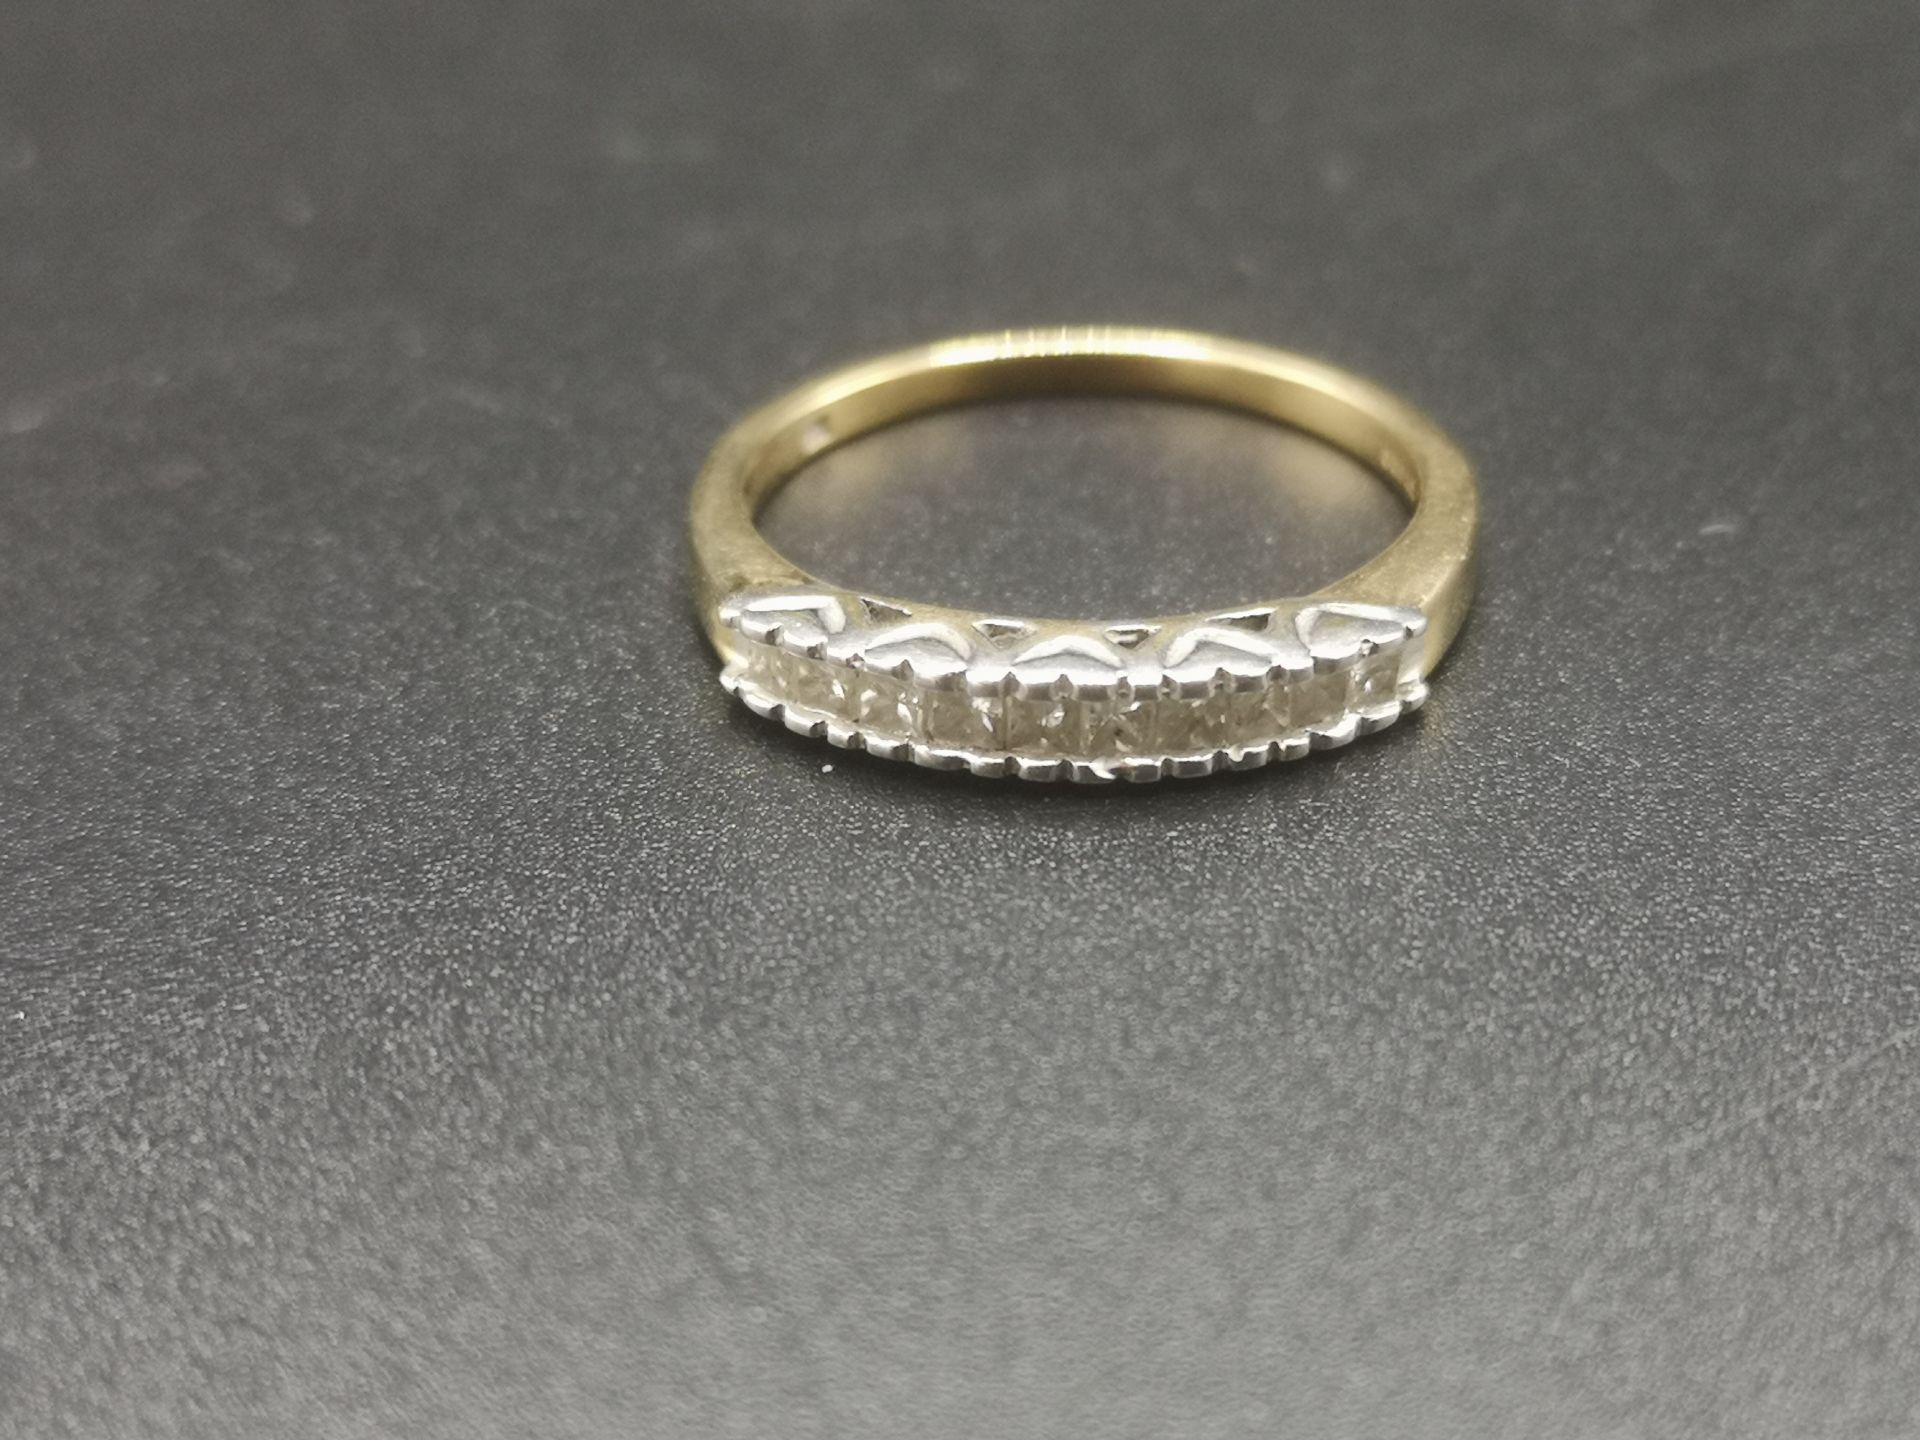 9ct gold ring with channel set diamonds - Image 2 of 5